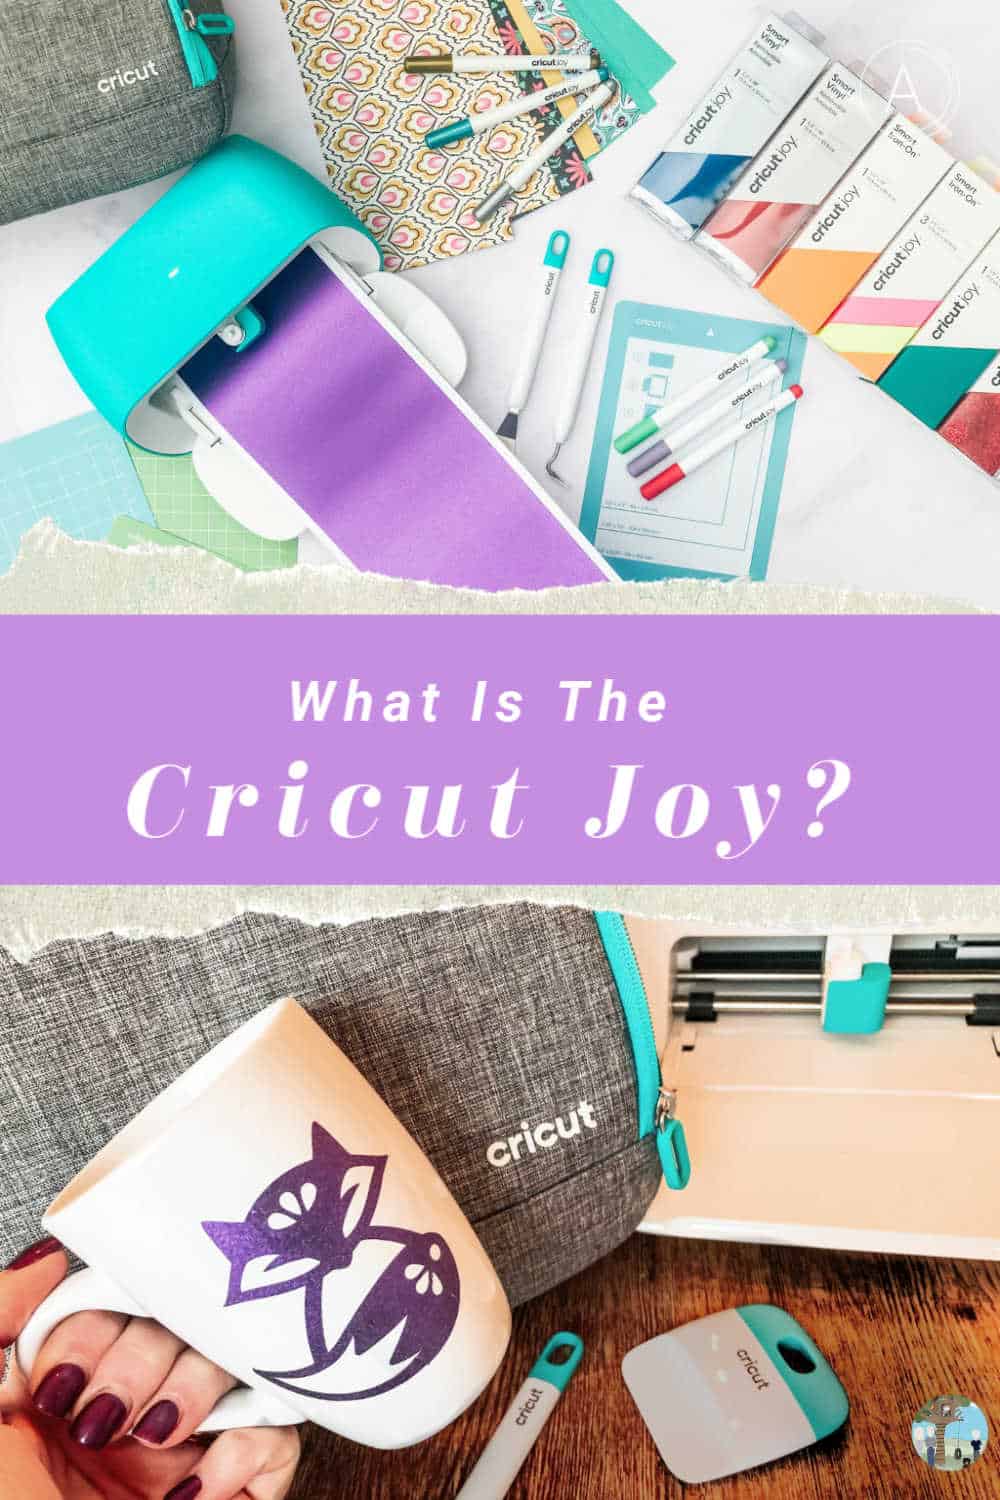 What Is The Cricut Joy, What can the Cricut Joy do, what materials does it cut and how easy is it to use?